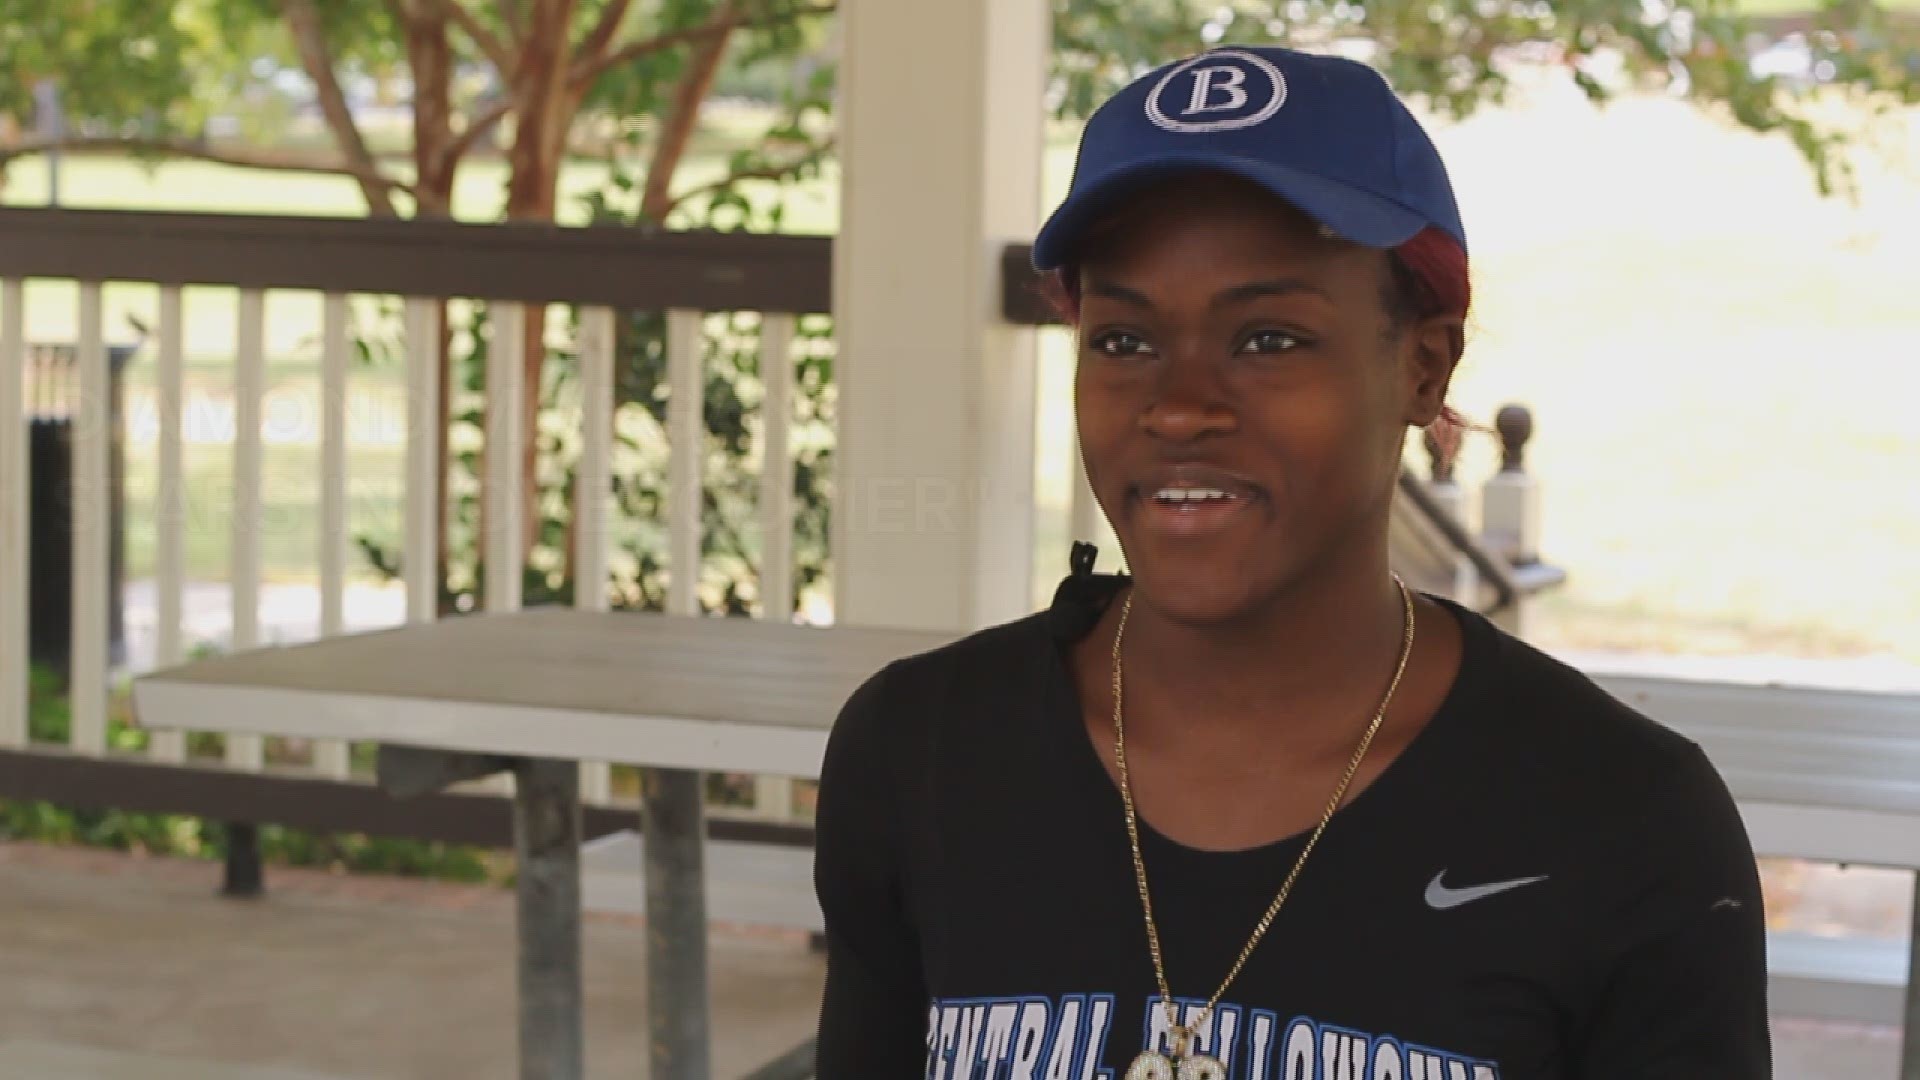 Diamond Morgan is a track athlete at Jones County High School. She's already broken records and holds state champion titles, but now she's starring in a movie.